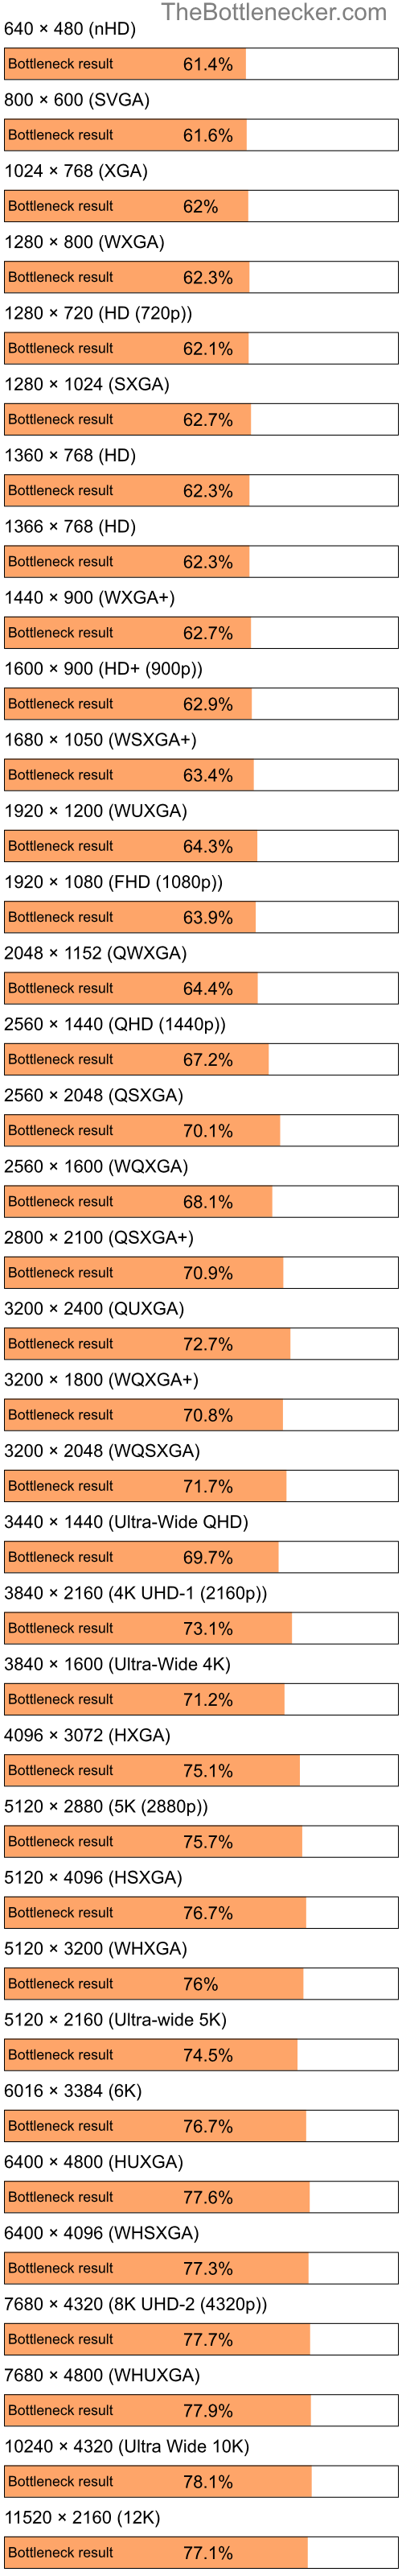 Bottleneck results by resolution for Intel Pentium 4 and AMD Radeon 9700 PRO in Processor Intense Tasks